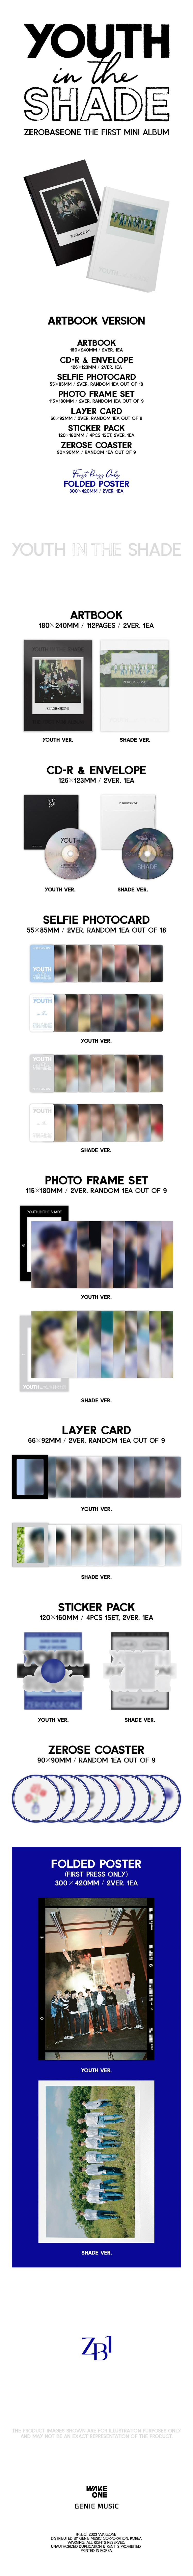 [ZEROBASEONE] 1st Mini Album [YOUTH IN THE SHADE] contents